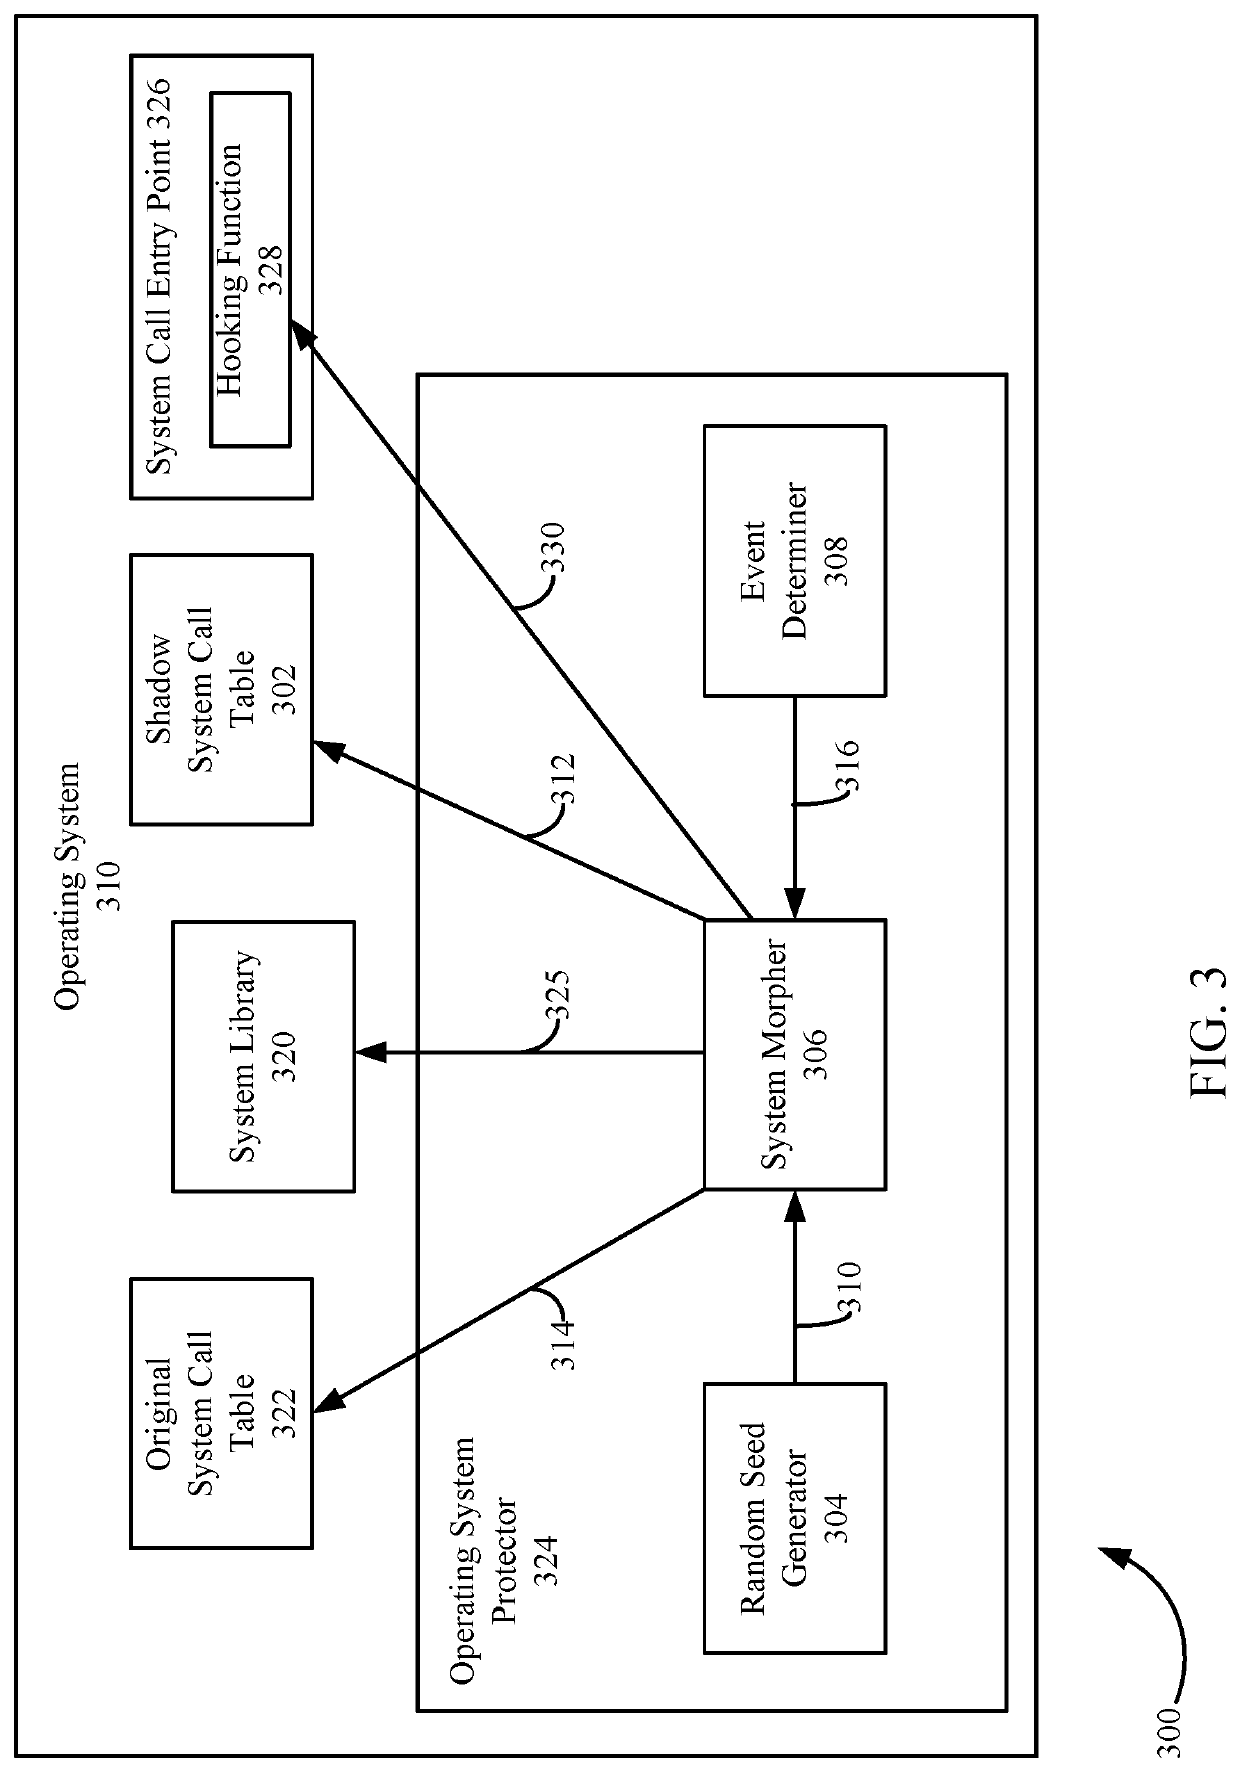 Malicious code protection for computer systems based on system call table modification and runtime application patching